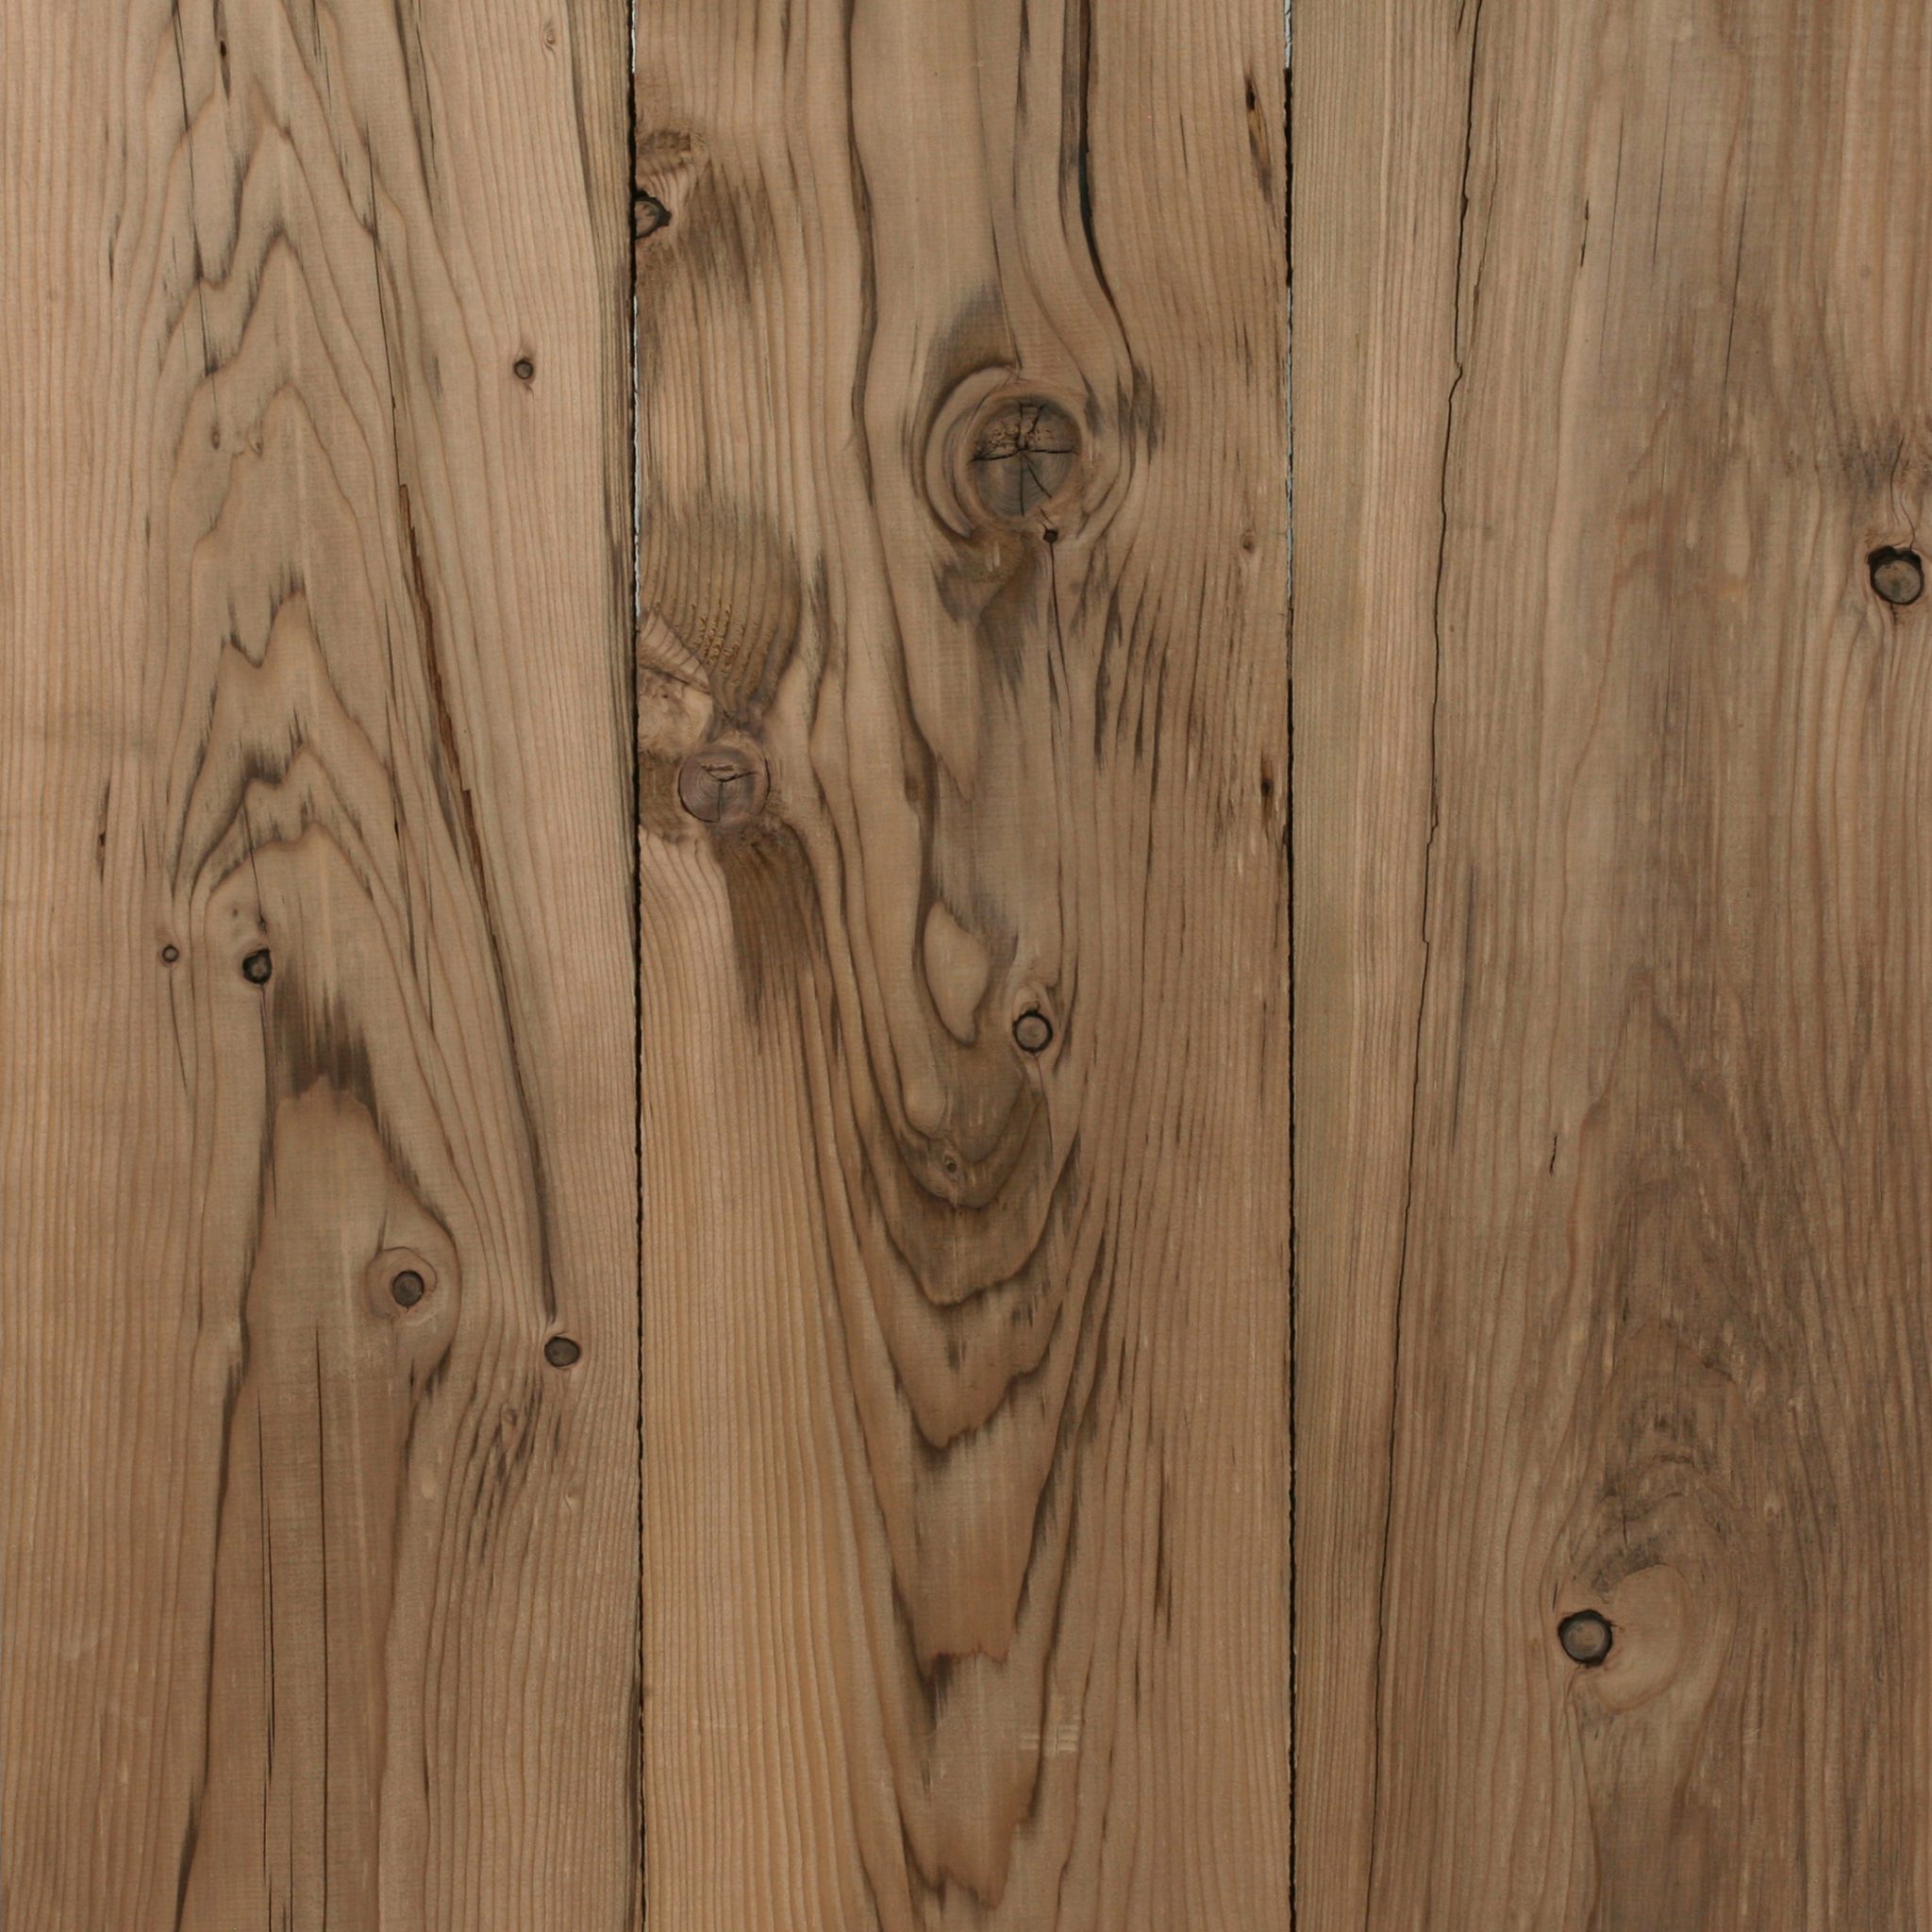 LOST COAST REDWOOD PANELING - SURFACED